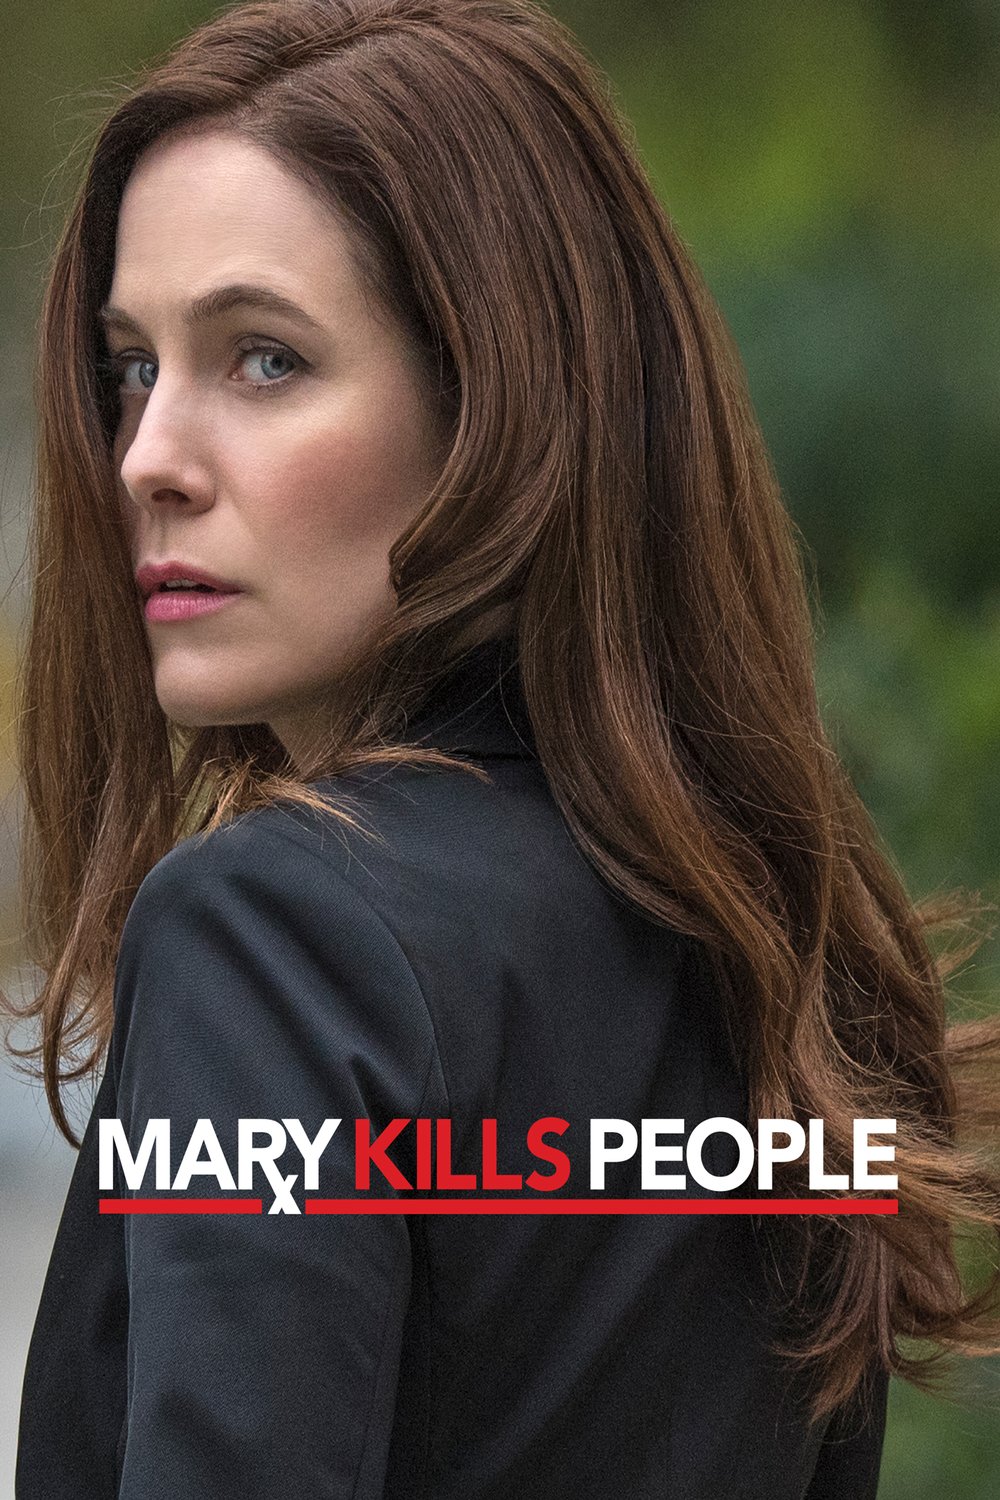 Poster of the movie Mary Kills People